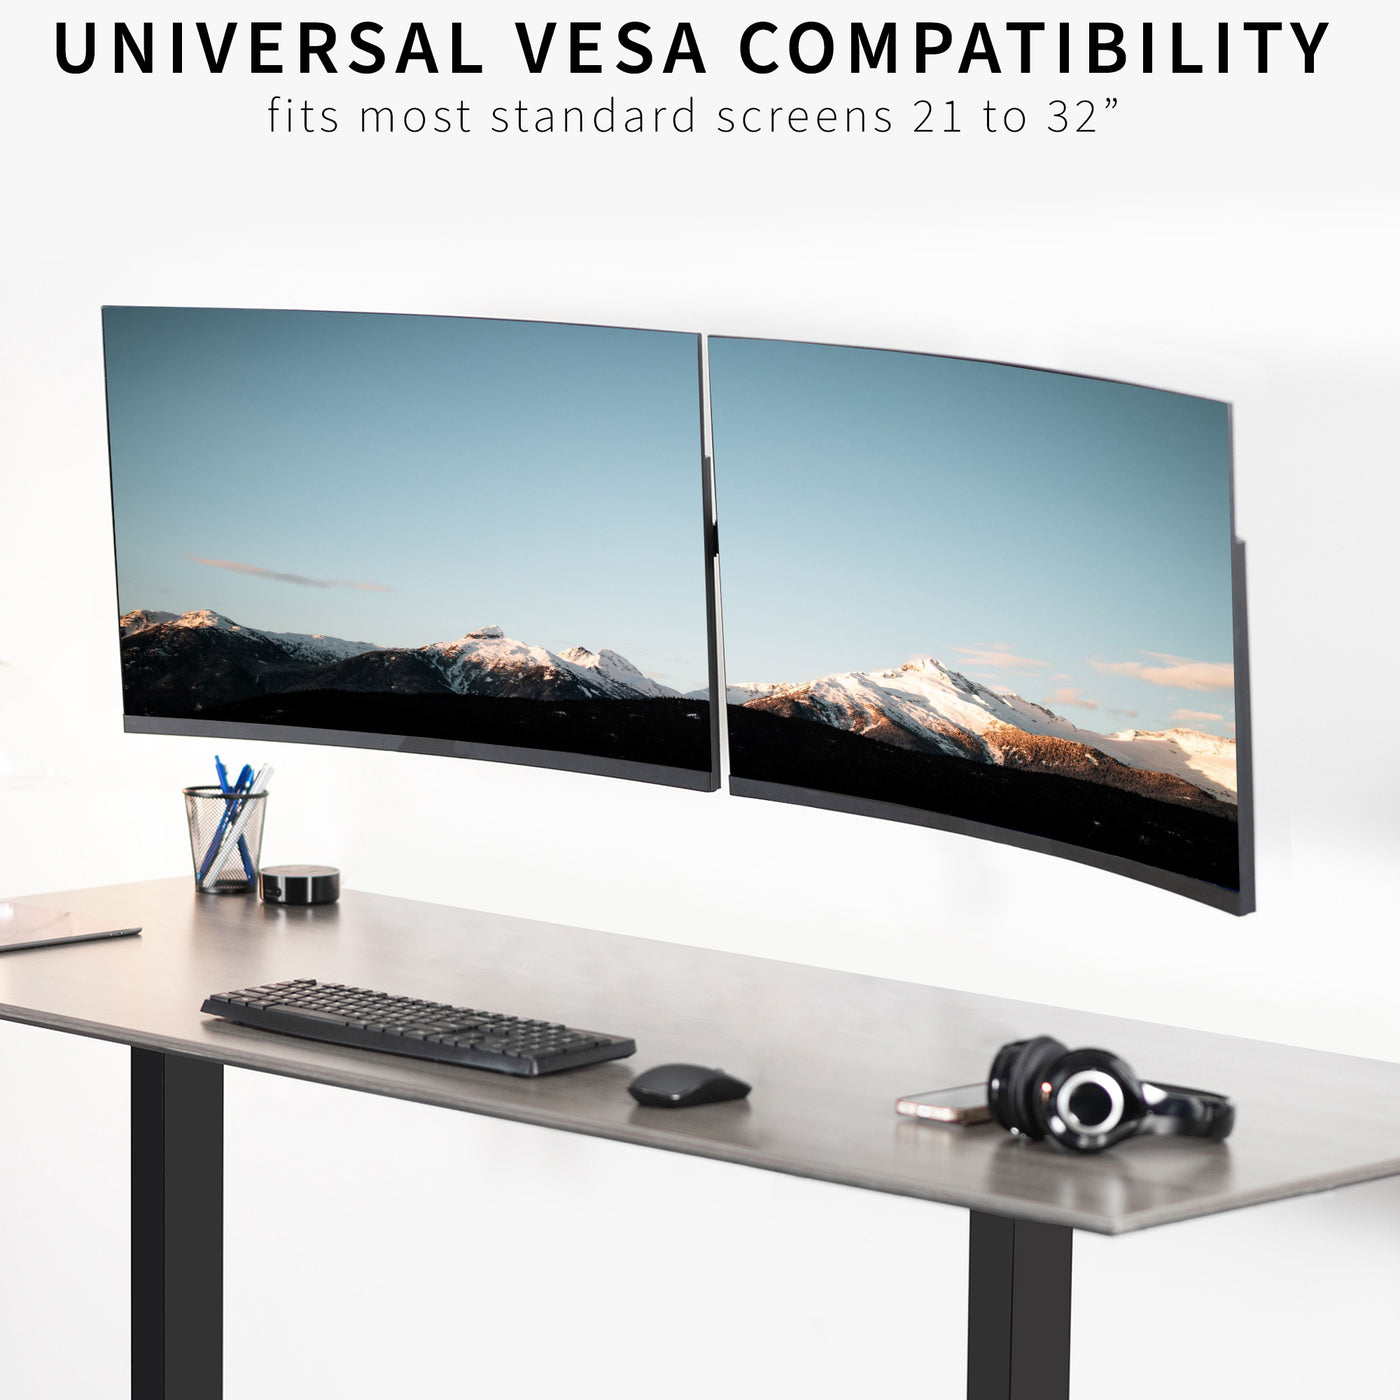 Adjustable telescoping dual monitor wall mount with universal VESA compatibility.